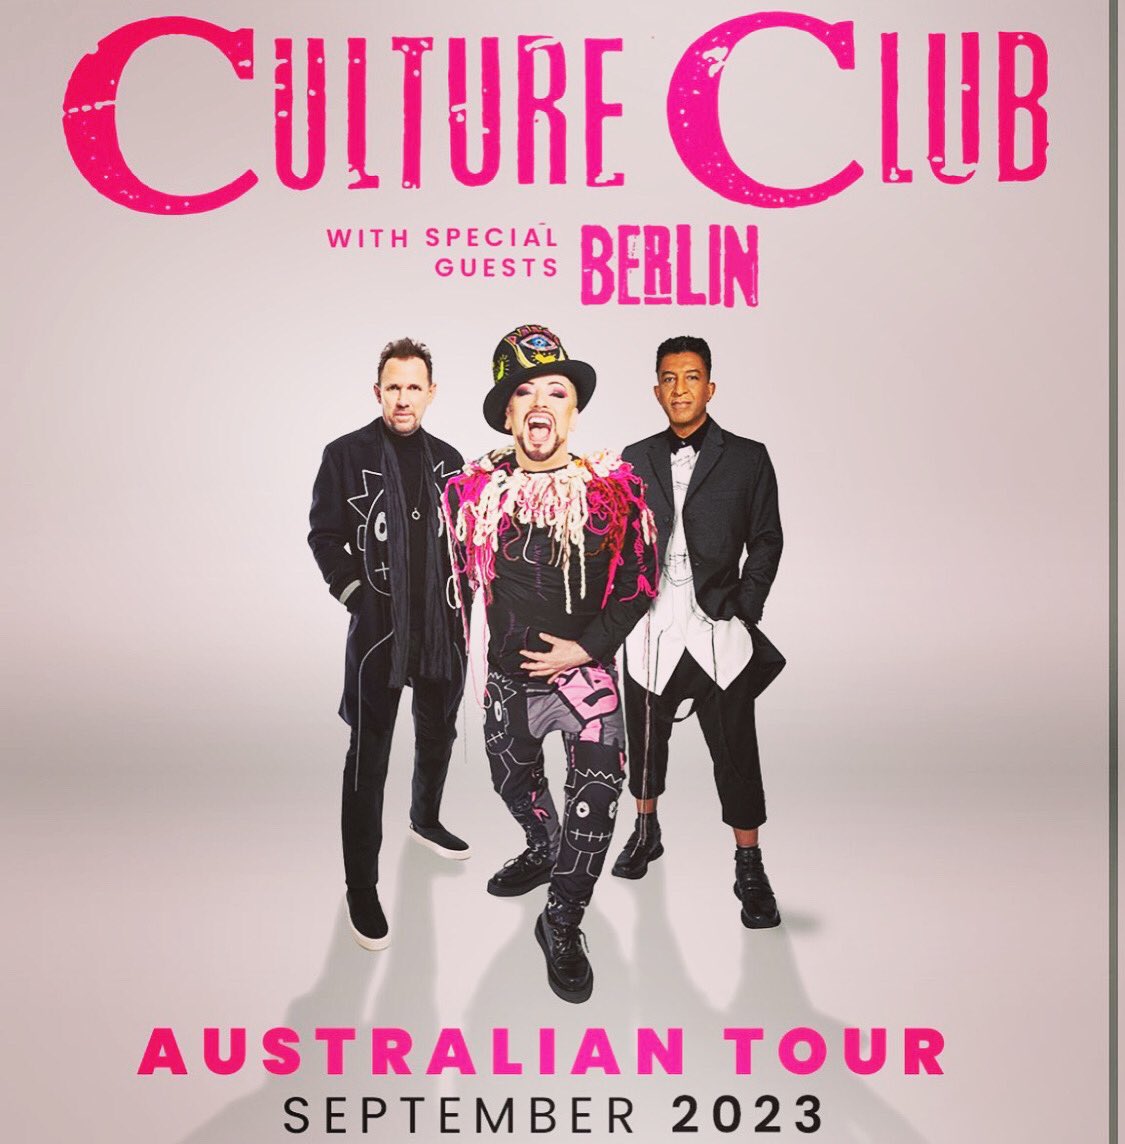 Haven’t tweeted in a while but omg this has made my day!! ❤️🎶❤️ #CultureClub #boygeorge #Australia #Australiantour #bringiton